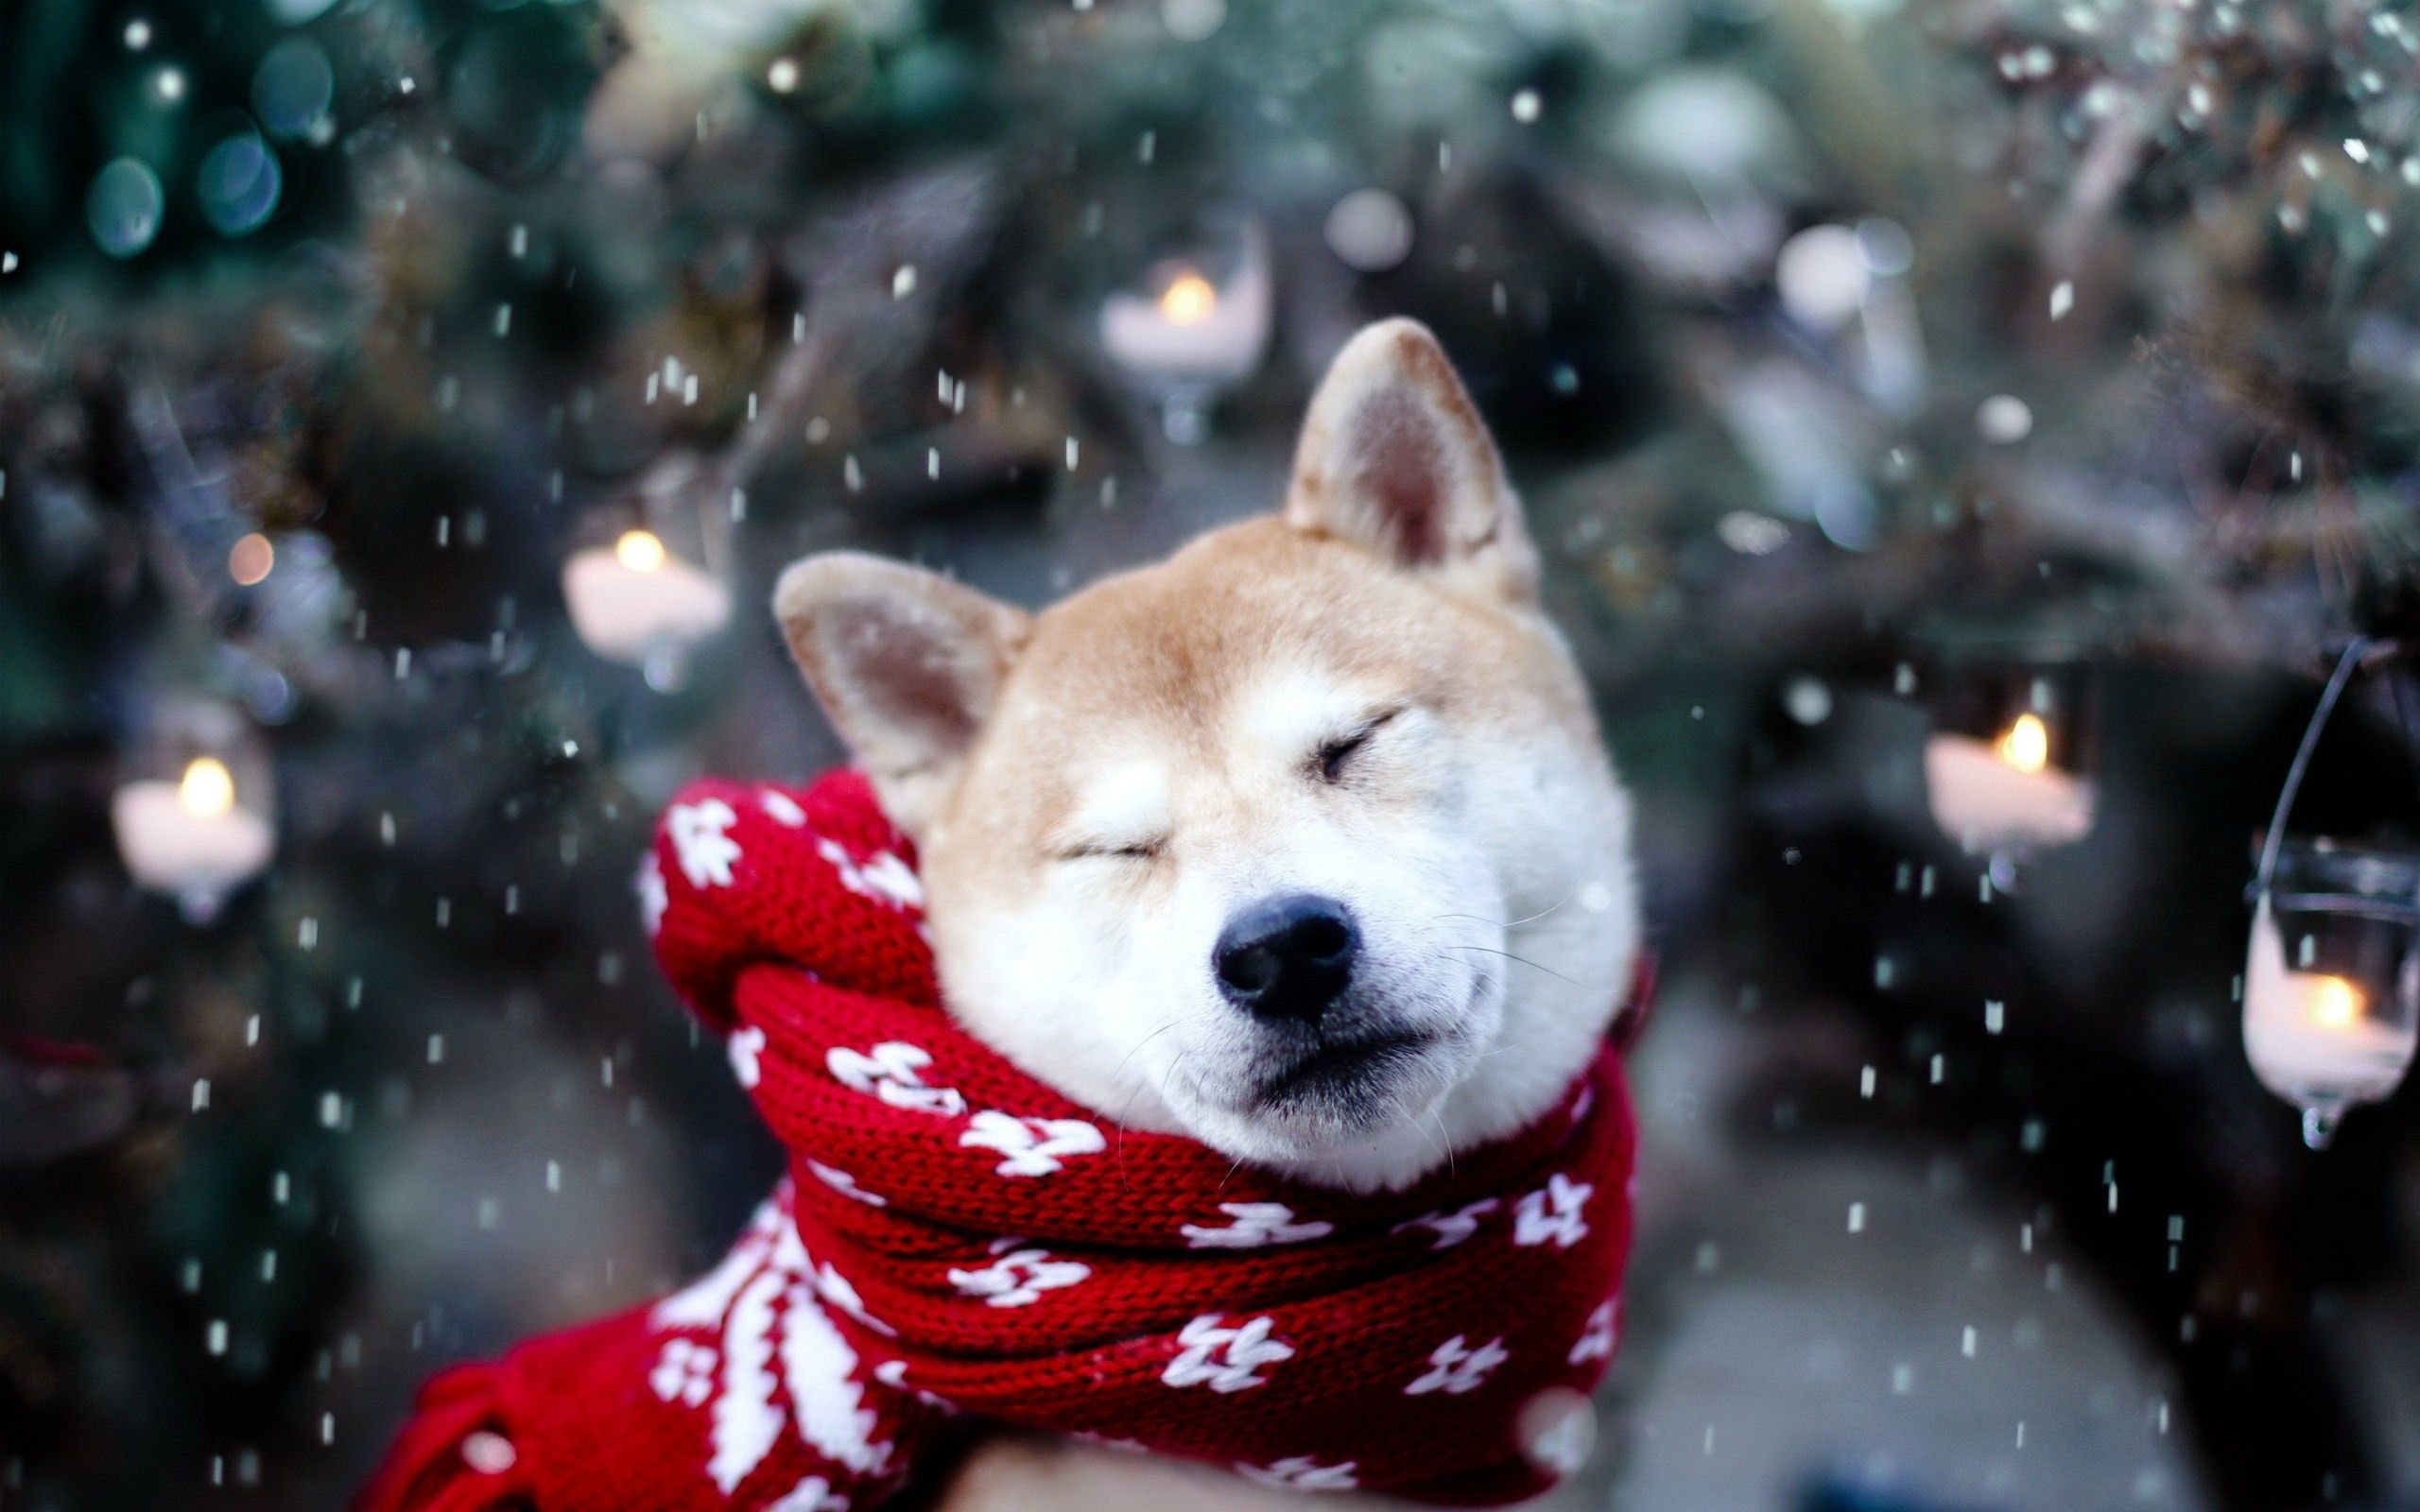 Snow dog wallpapers, Wintry scenes, Charming dogs, Snowy landscapes, 2560x1600 HD Desktop